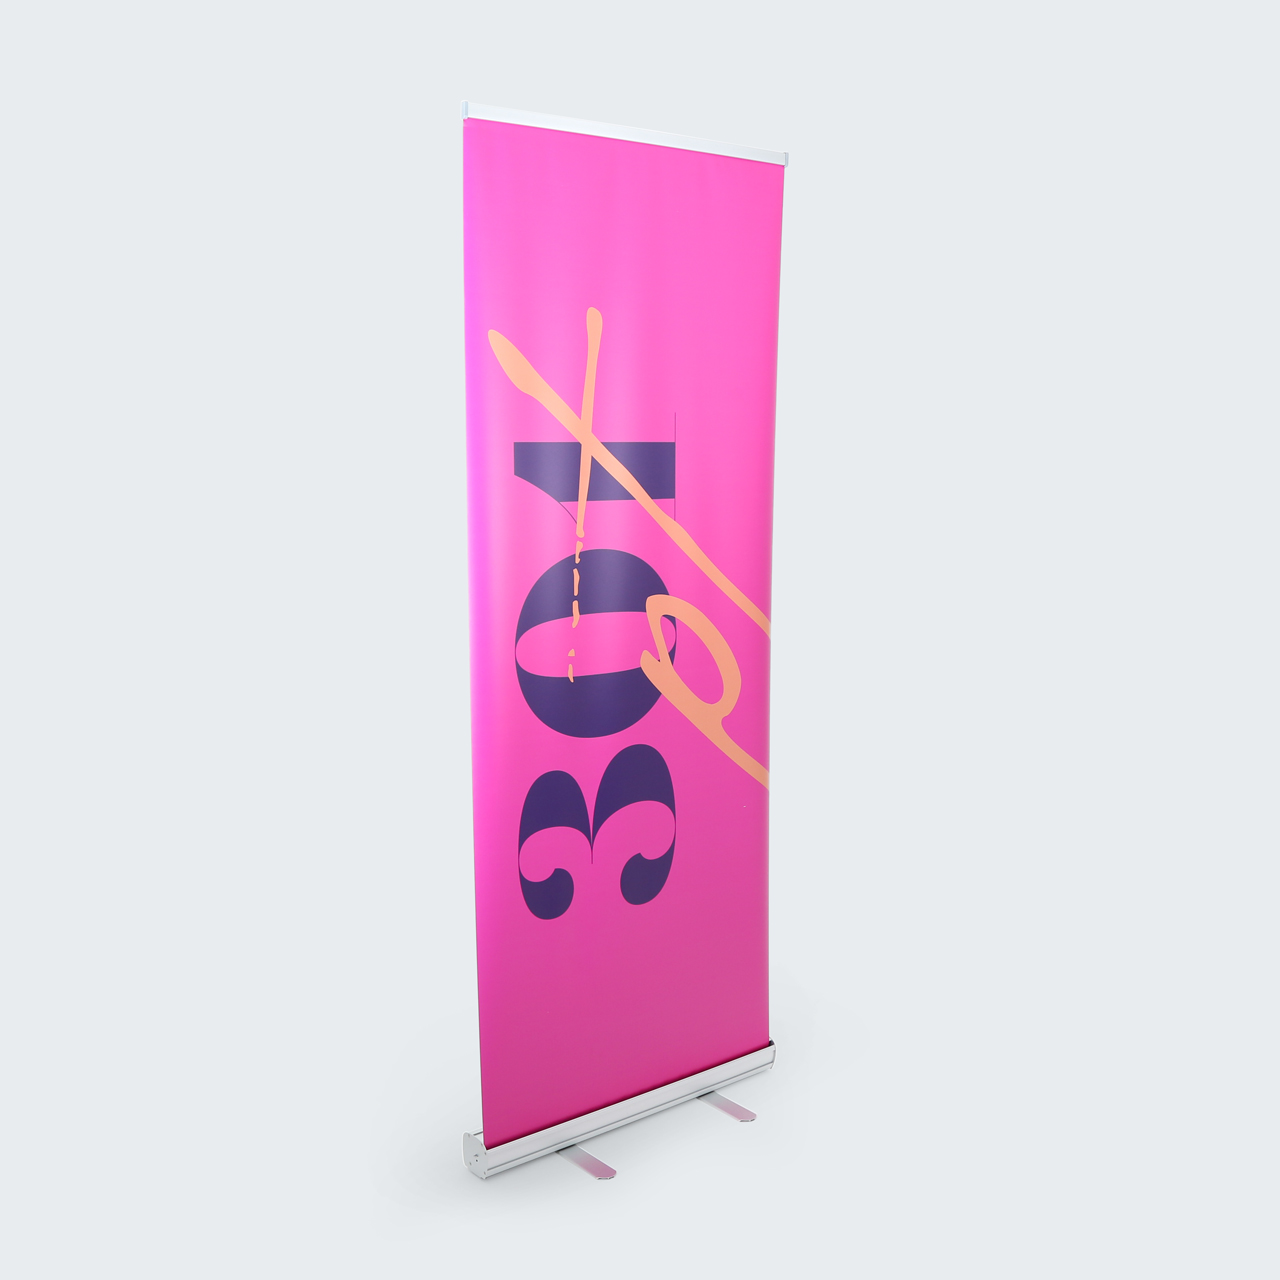 A retractable banner printed with 301 pt in black and yellow on a pink background.